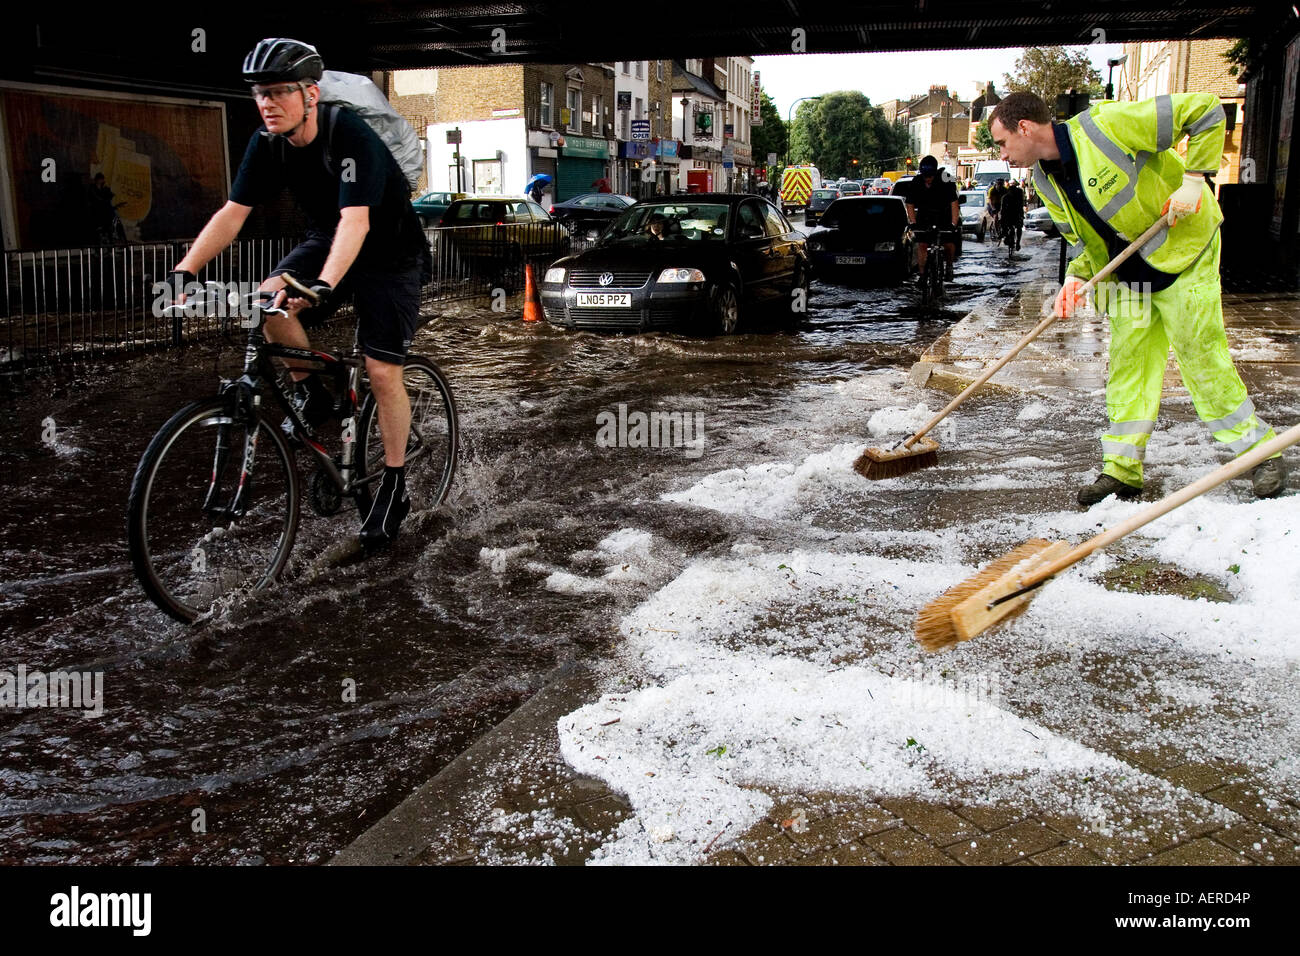 Commuters making their way through flooding after a freak hail storm in Central London, summer 2007. Stock Photo